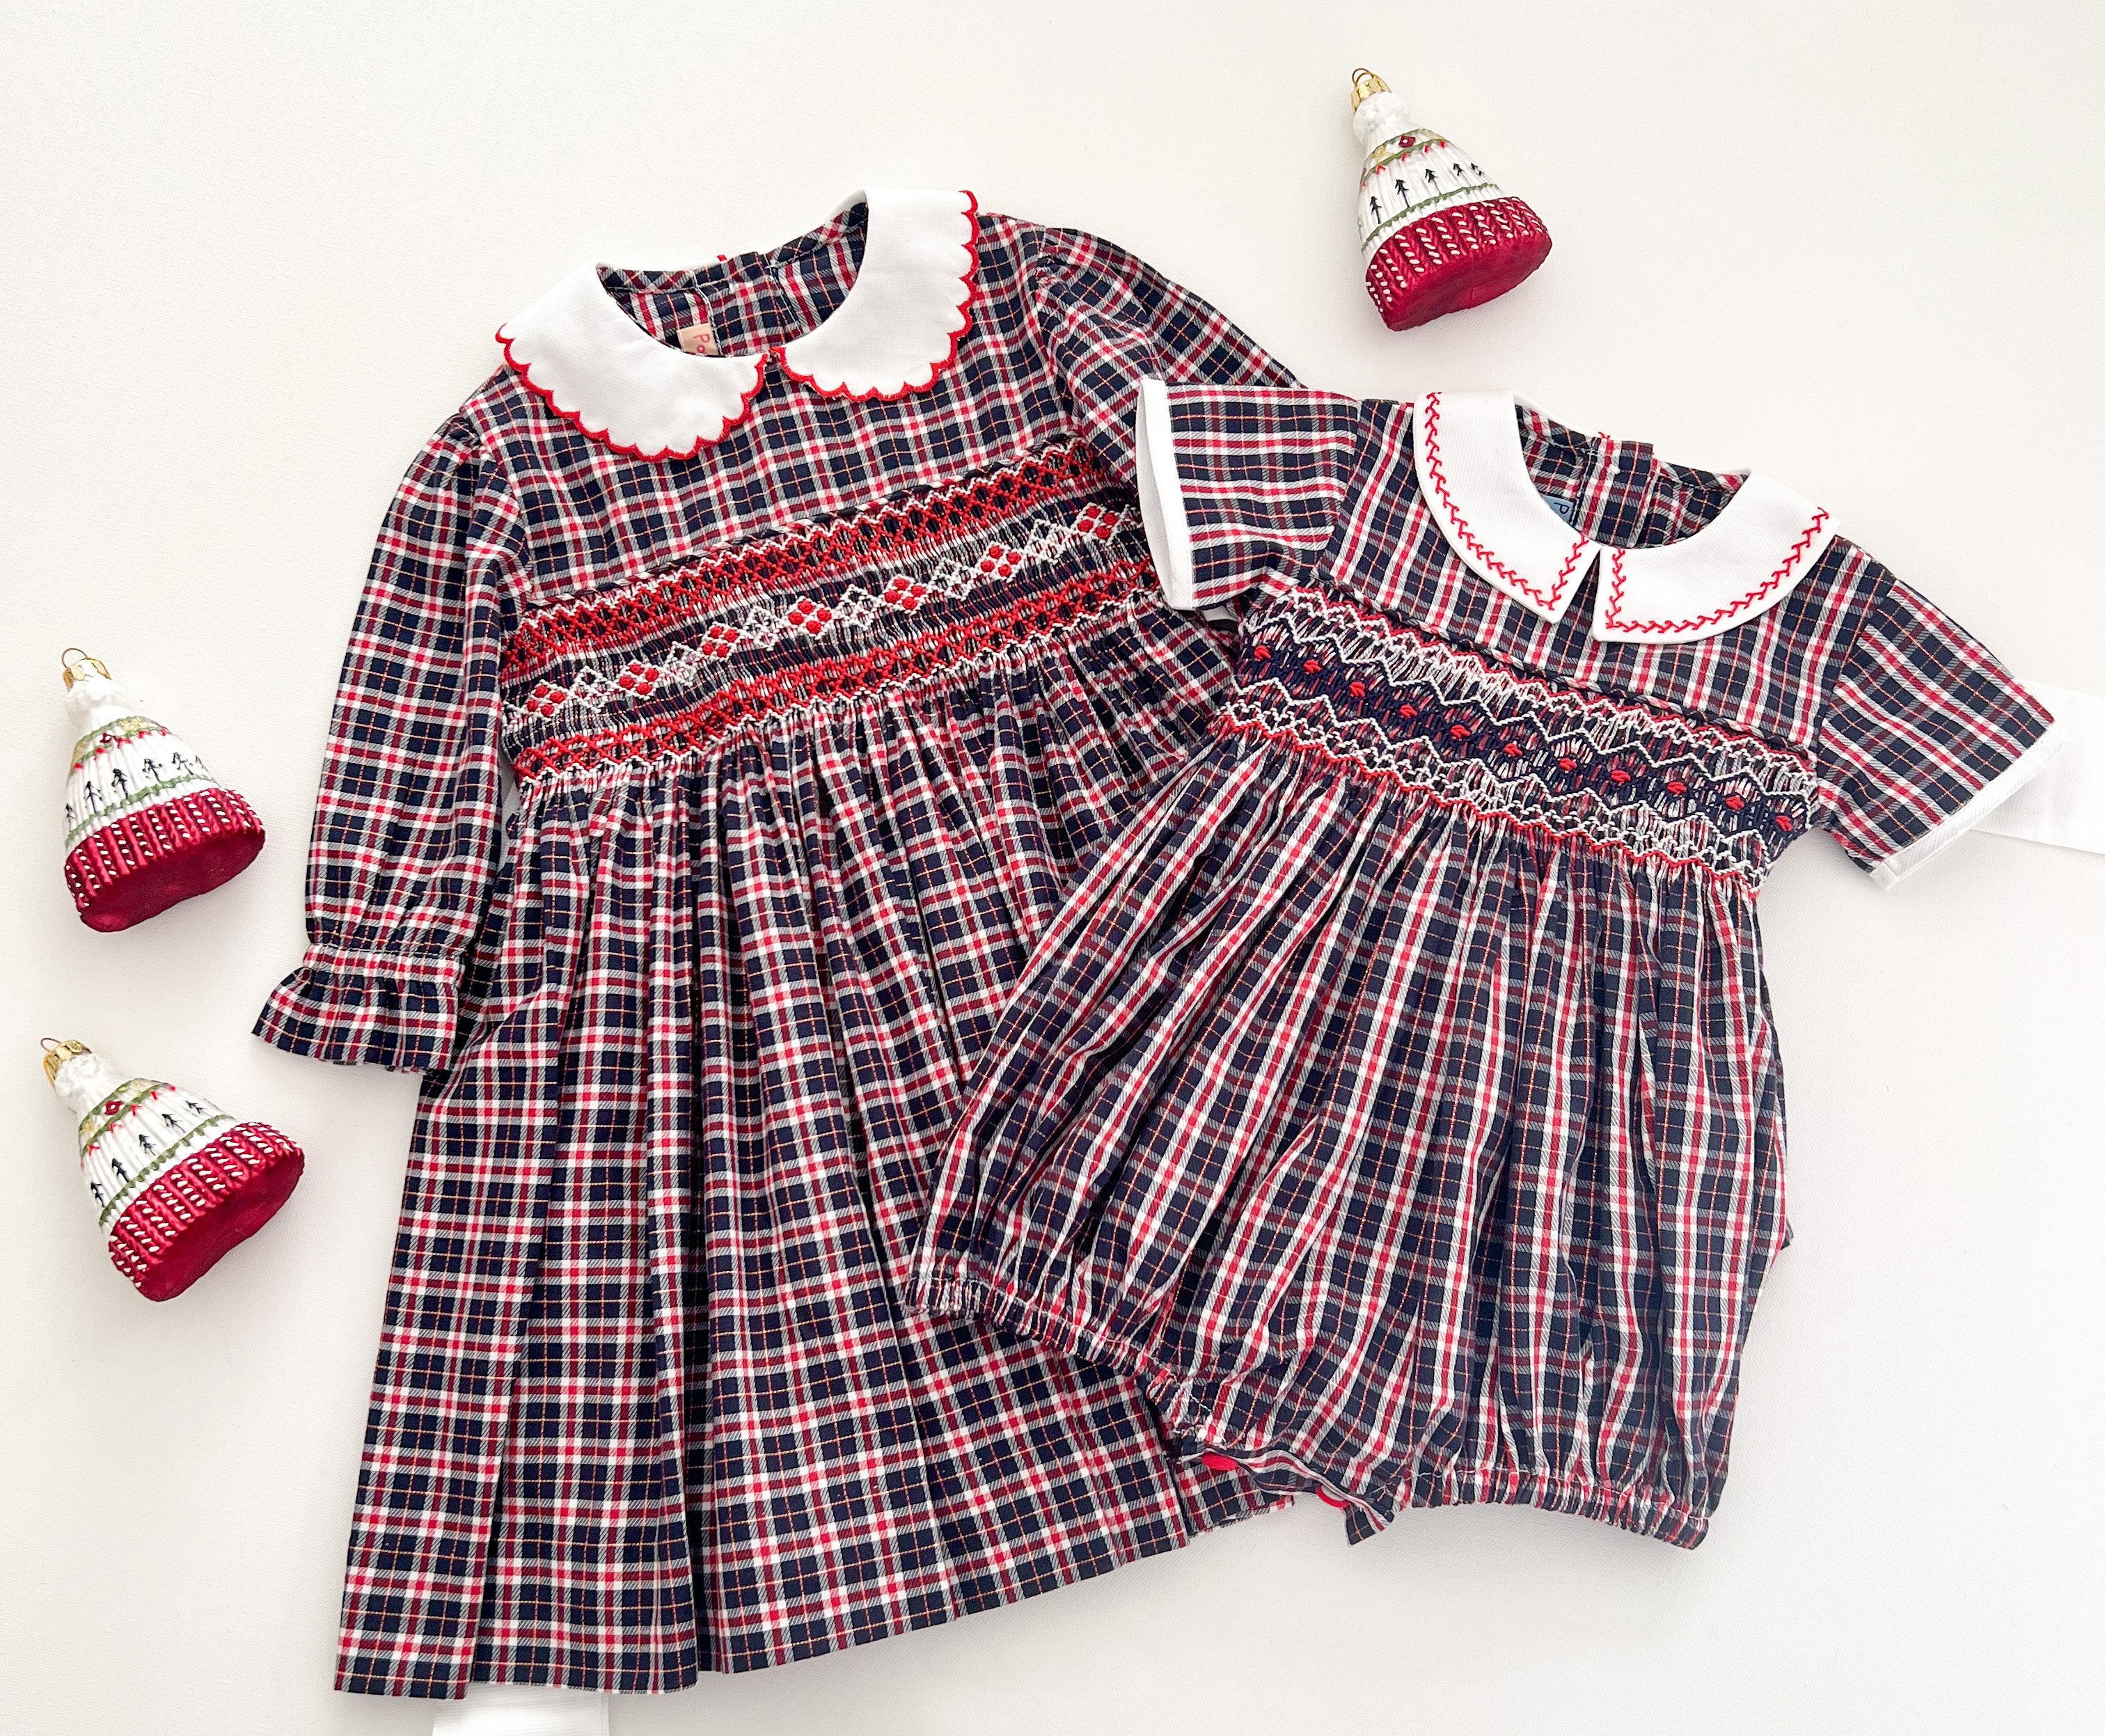 ** SECONDS SALE ** The hand smocked unisex ANDRÉA romper - Tartan blue/red